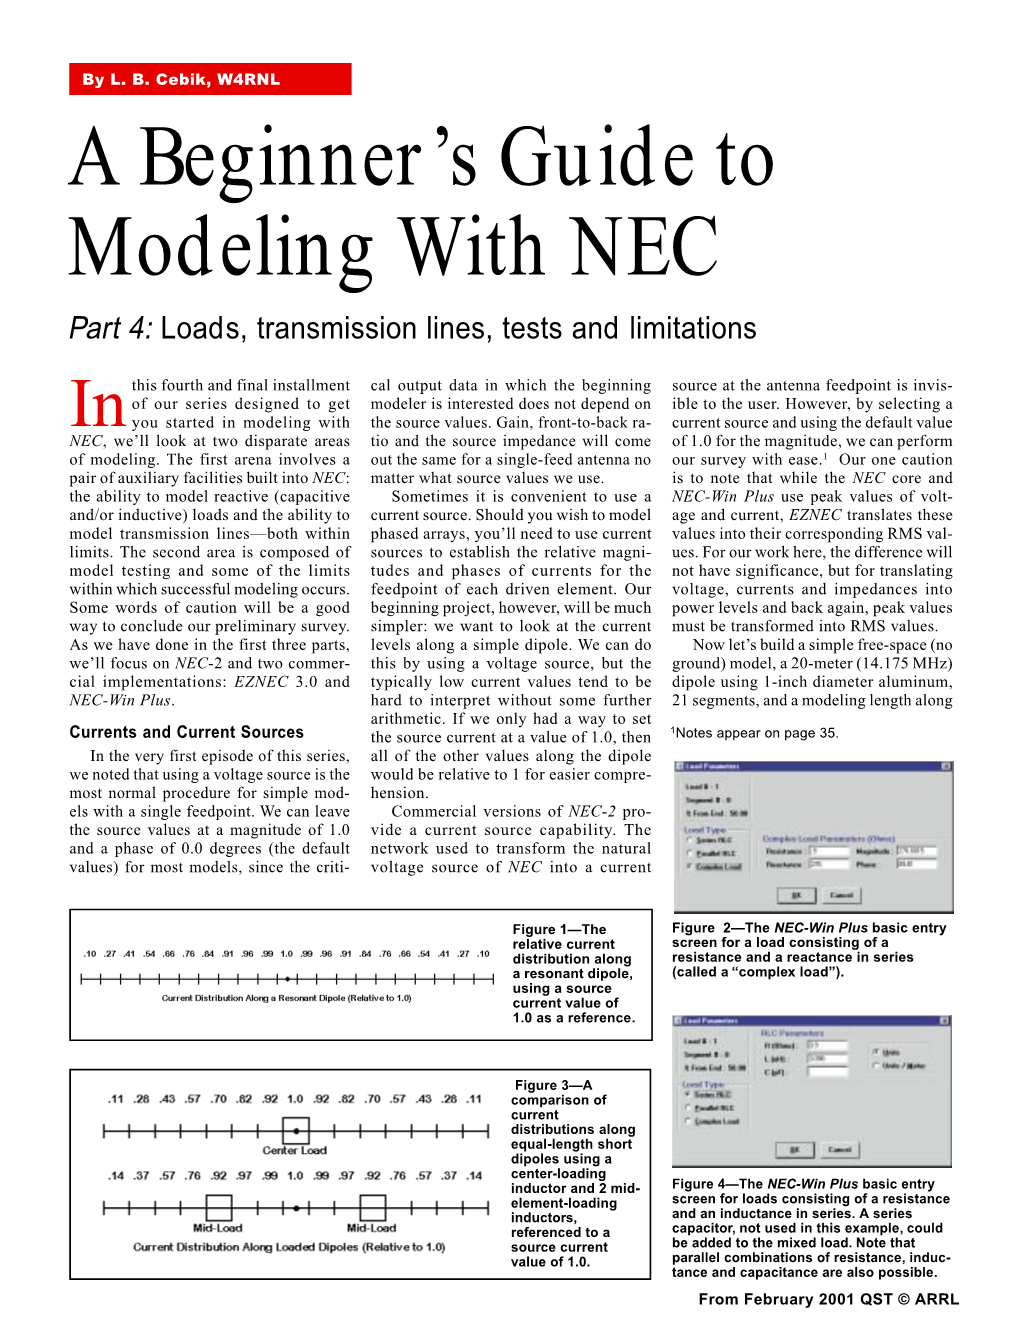 A Beginner's Guide to Modeling with NEC Part 4